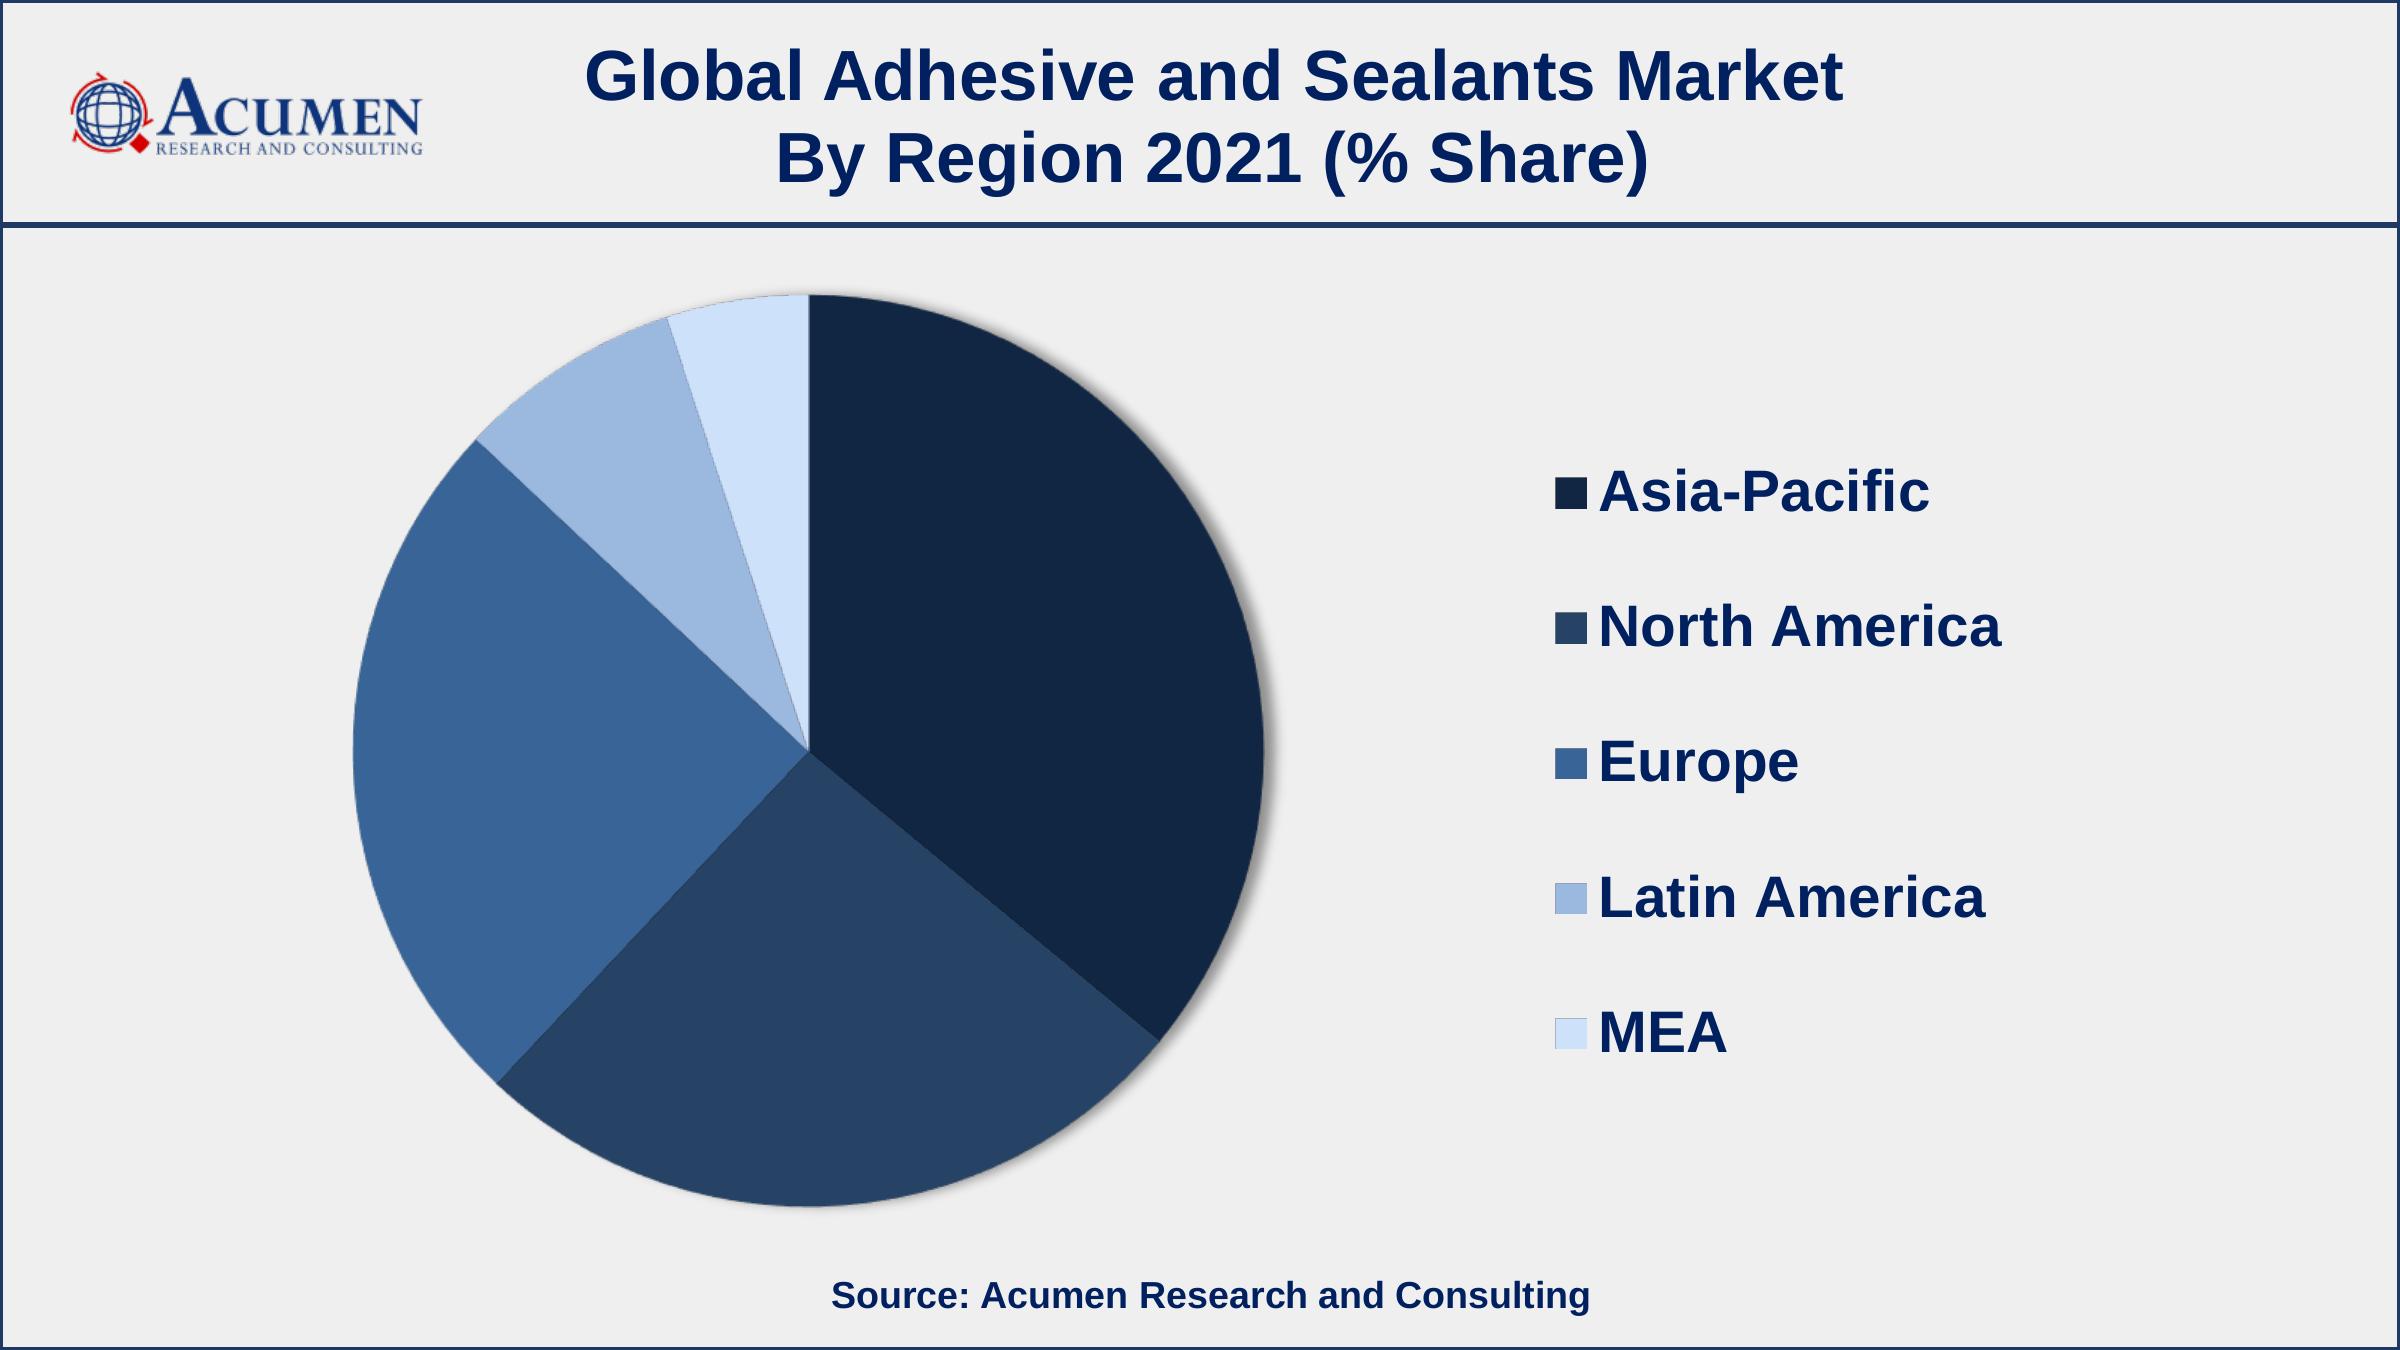 Asia-Pacific Holds Dominating Share Of Adhesive and Sealants Market